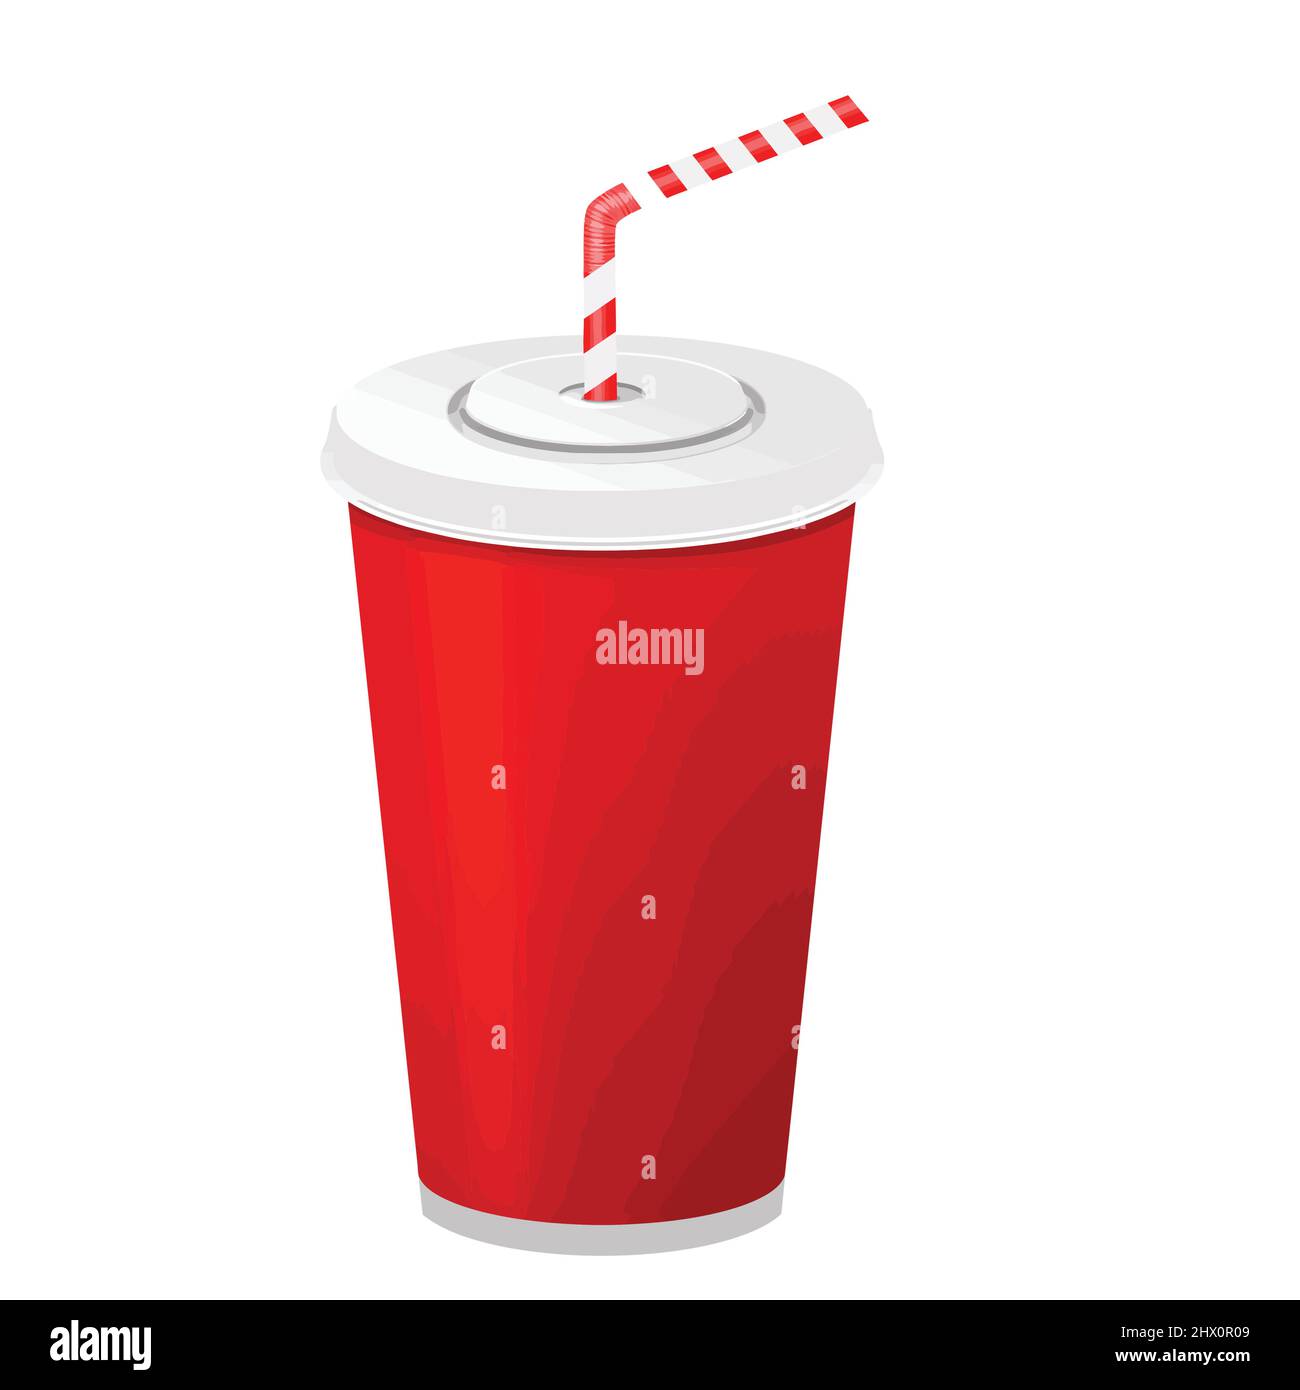 https://c8.alamy.com/comp/2HX0R09/realistic-paper-disposable-beverage-cup-for-soda-with-drinking-straw-on-white-background-vector-illustration-2HX0R09.jpg